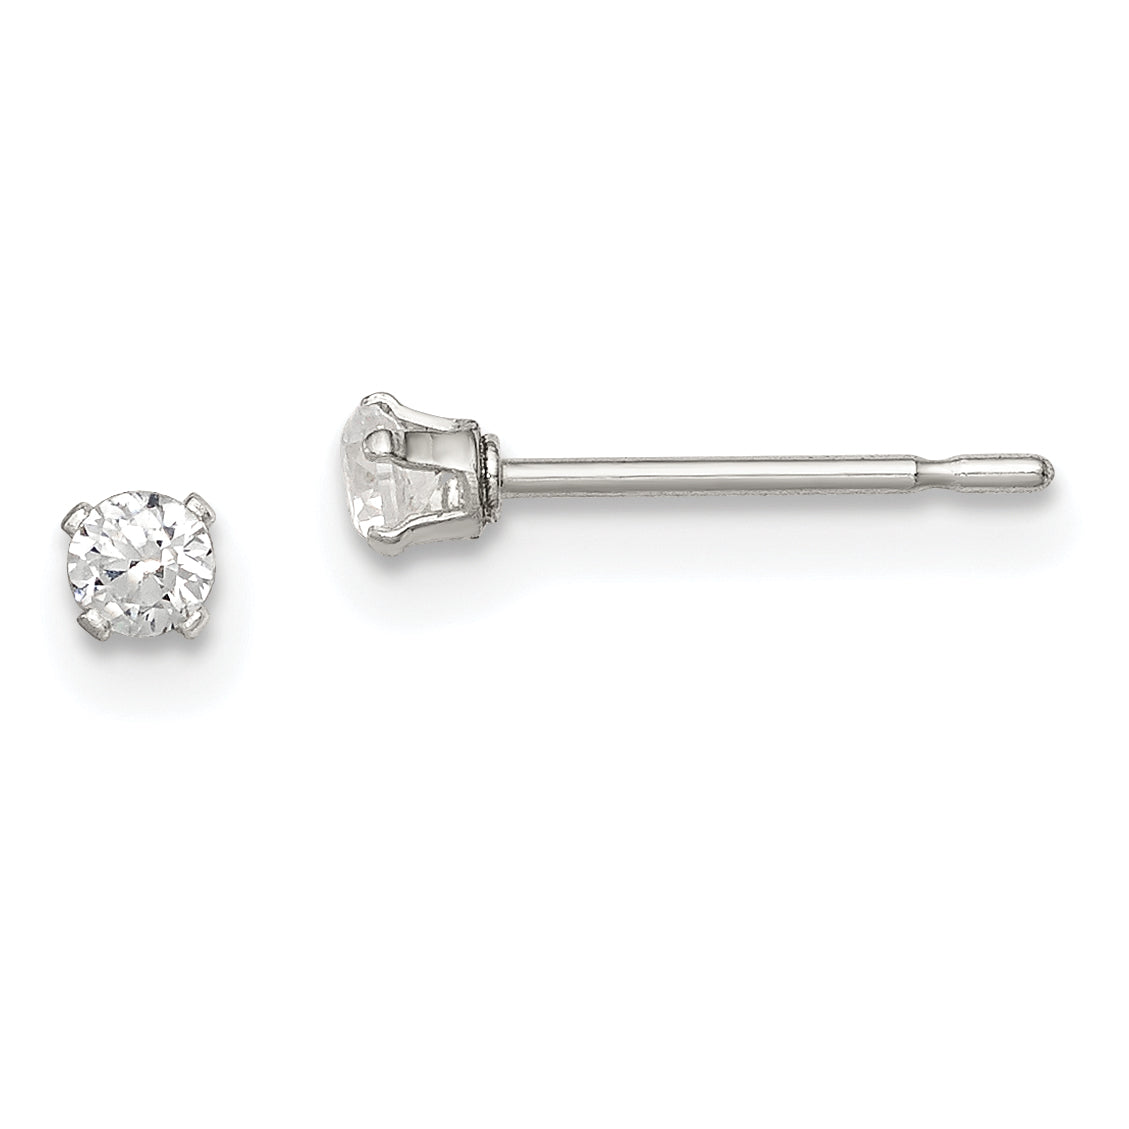 Sterling Silver Polished Children's 2.5mm Round Snap Set CZ Stud Earrings